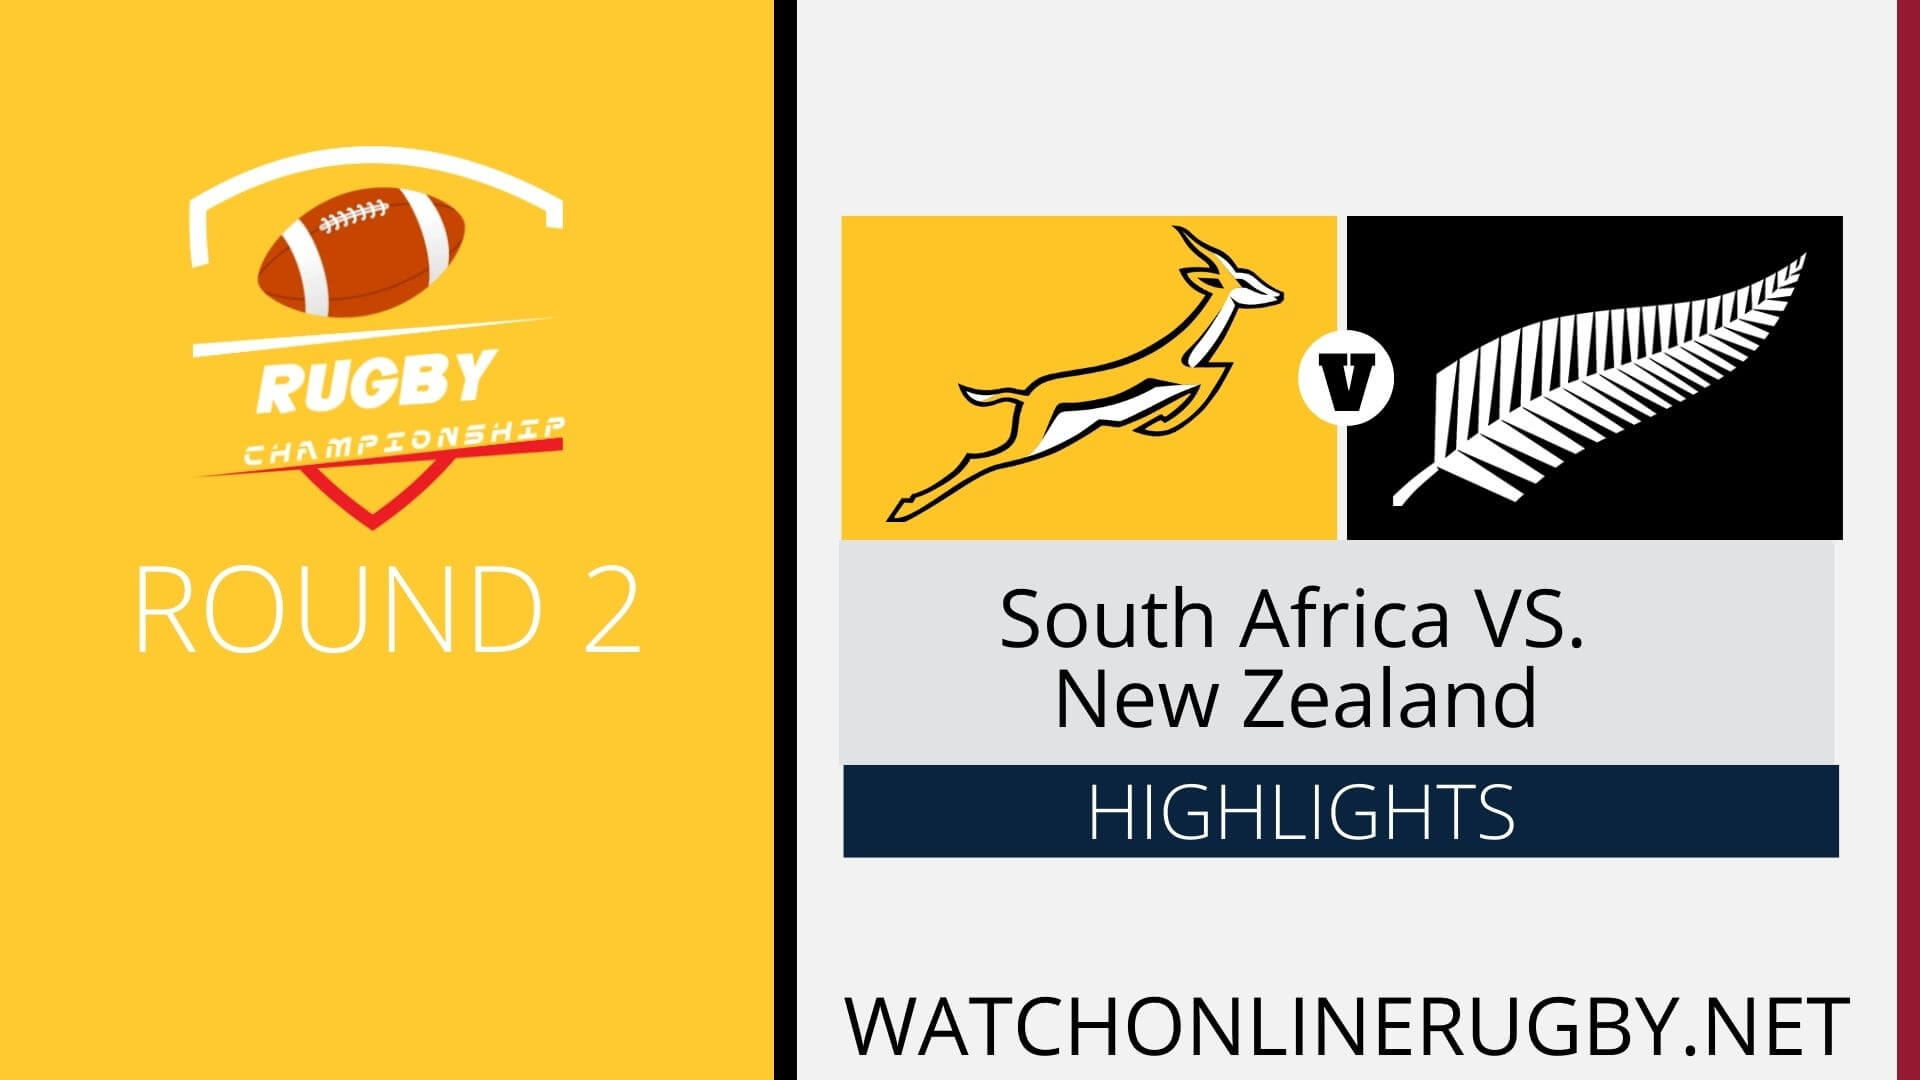 South Africa Vs New Zealand Rugby Championship 2022 RD 2